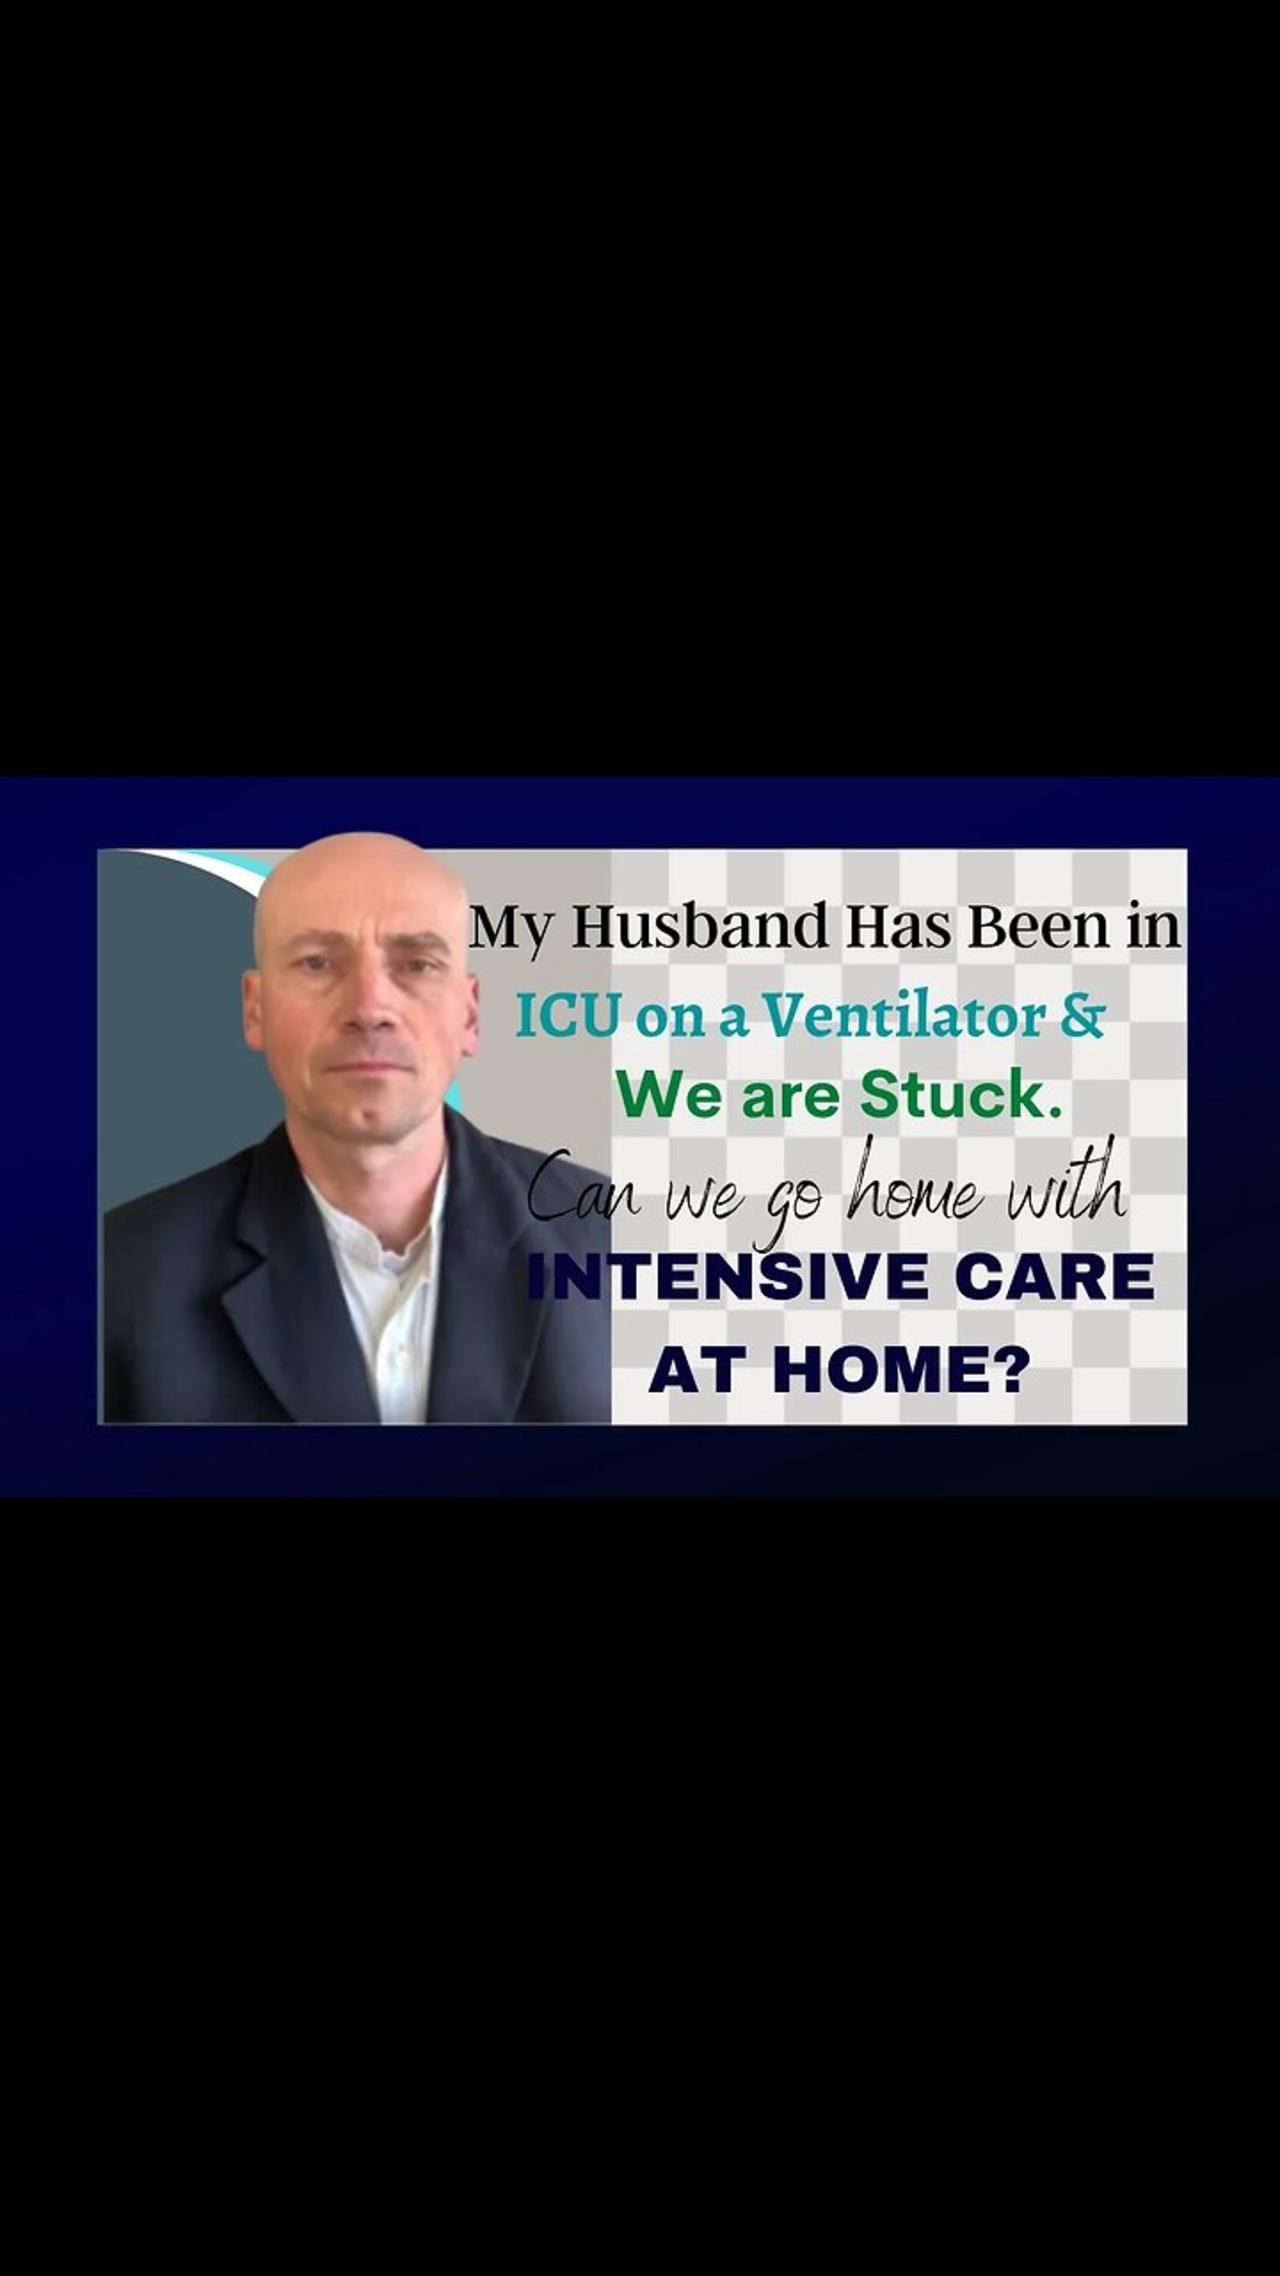 MY HUSBAND HAS BEEN IN ICU ON A VENTILATOR& WE ARE STUCK.CAN WE GO HOME WITH INTENSIVE CARE AT HOME?